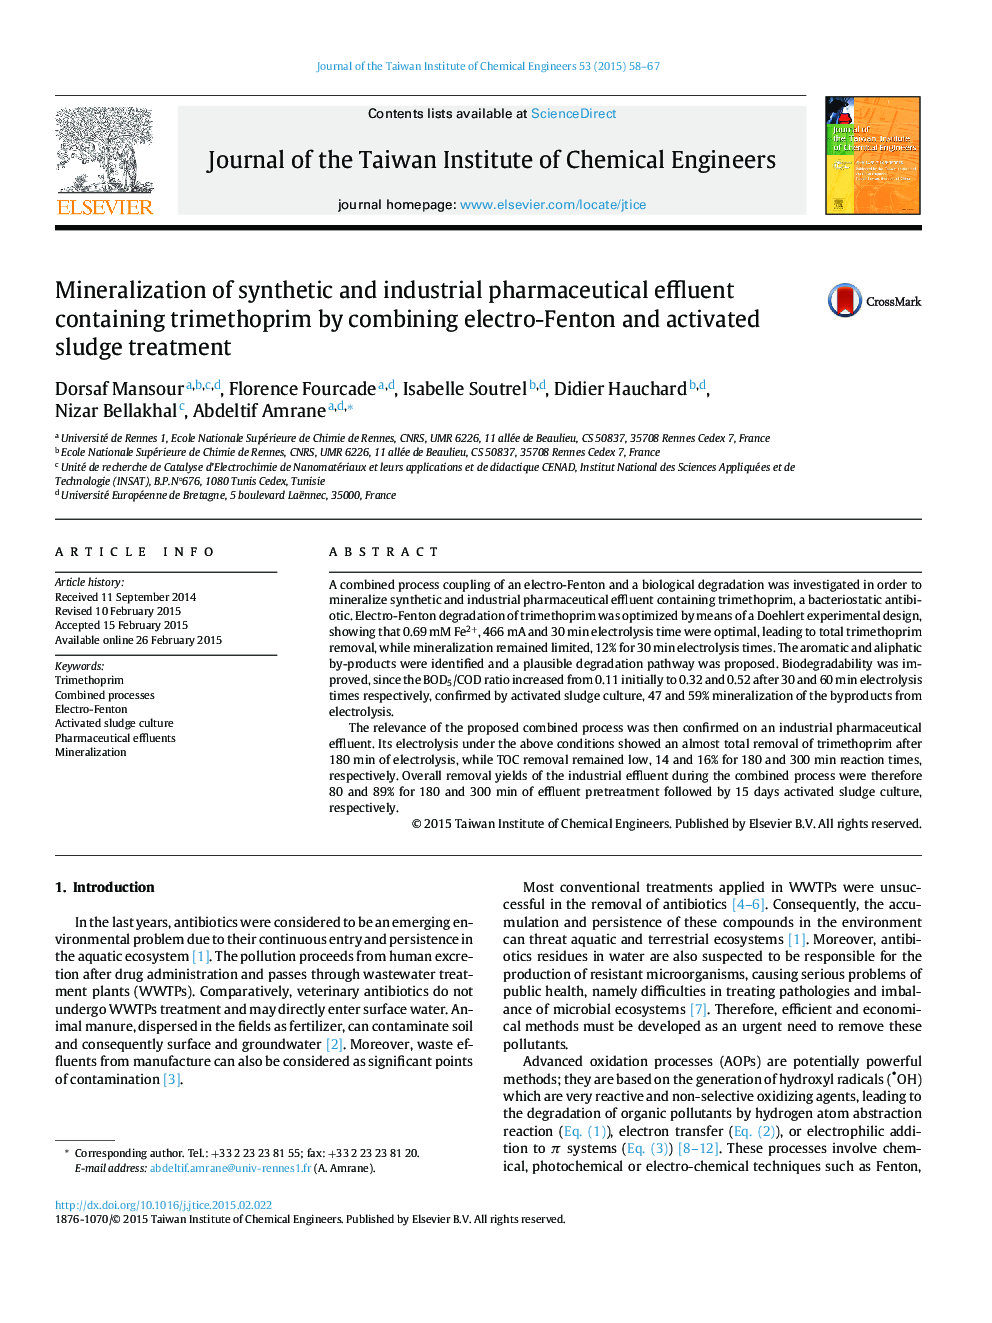 Mineralization of synthetic and industrial pharmaceutical effluent containing trimethoprim by combining electro-Fenton and activated sludge treatment